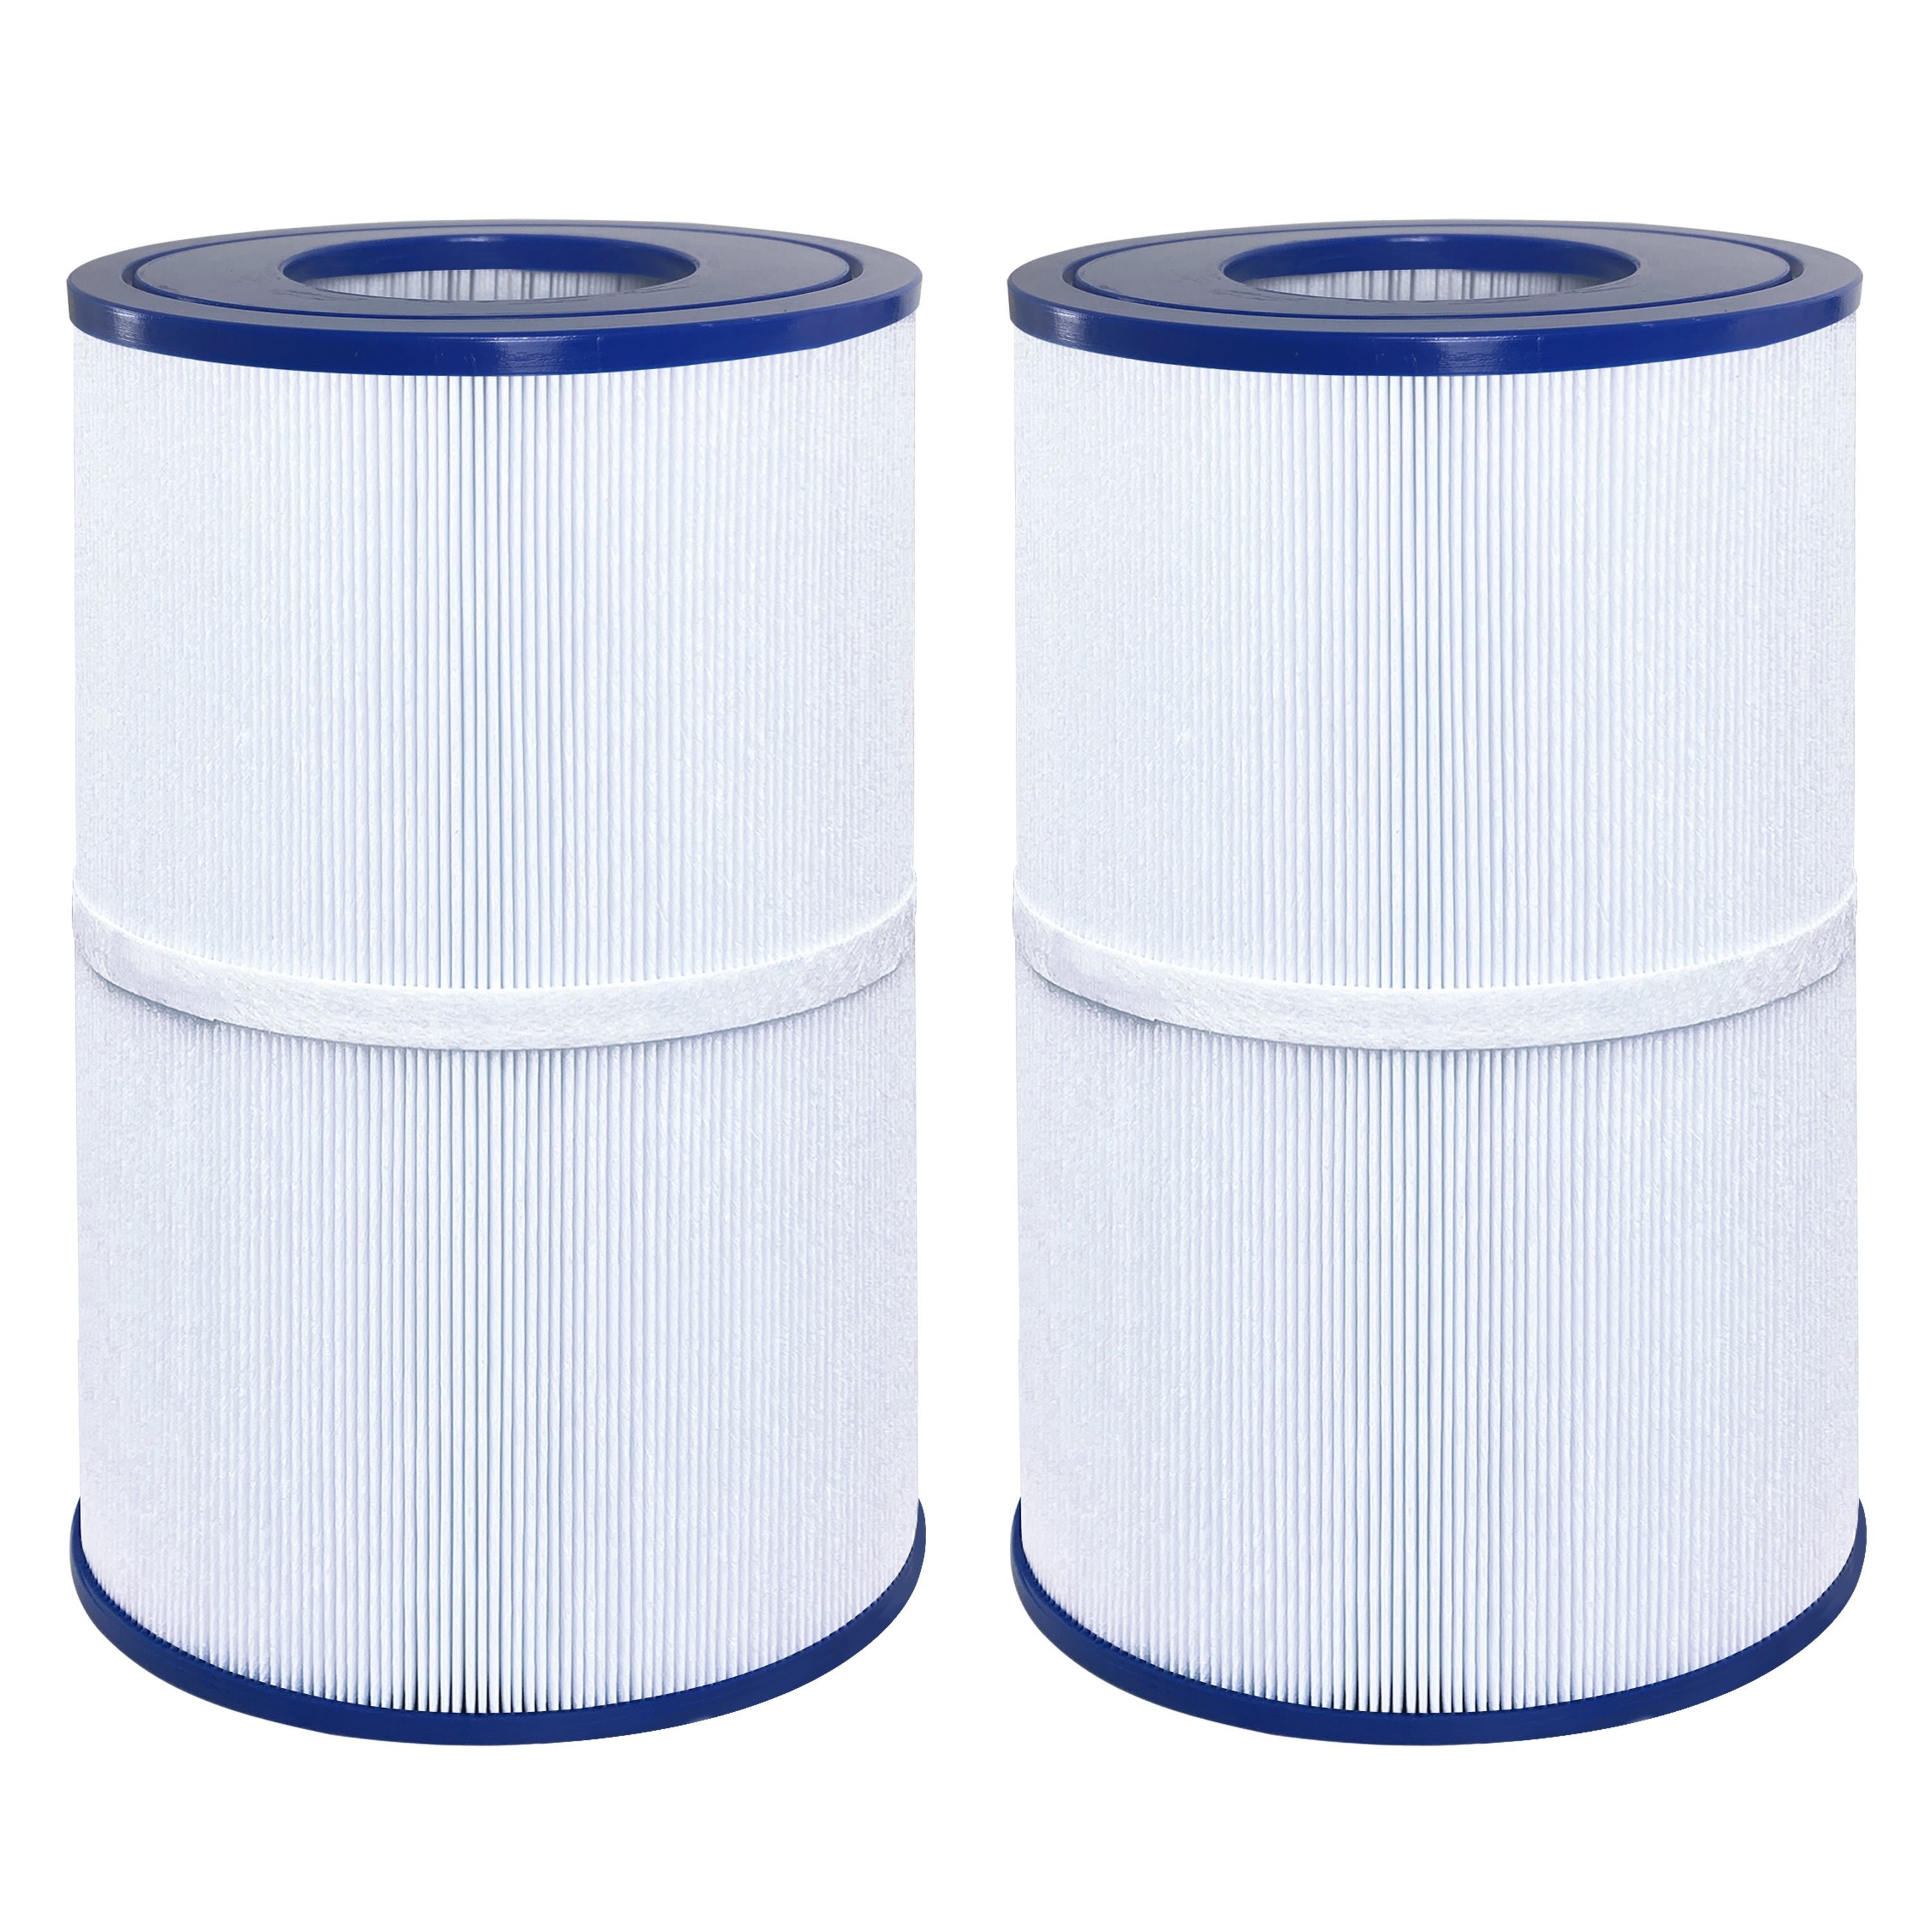 

Spa Filter Compatible With Pdm 30, 461269, Fc9940m. Oval-shaped Filter Cartridge. 2013+ : Odyssey, Big Ez, Ez Spa, Ezl, Fantasy. Crossover: 730l, 730s, 2 Pack